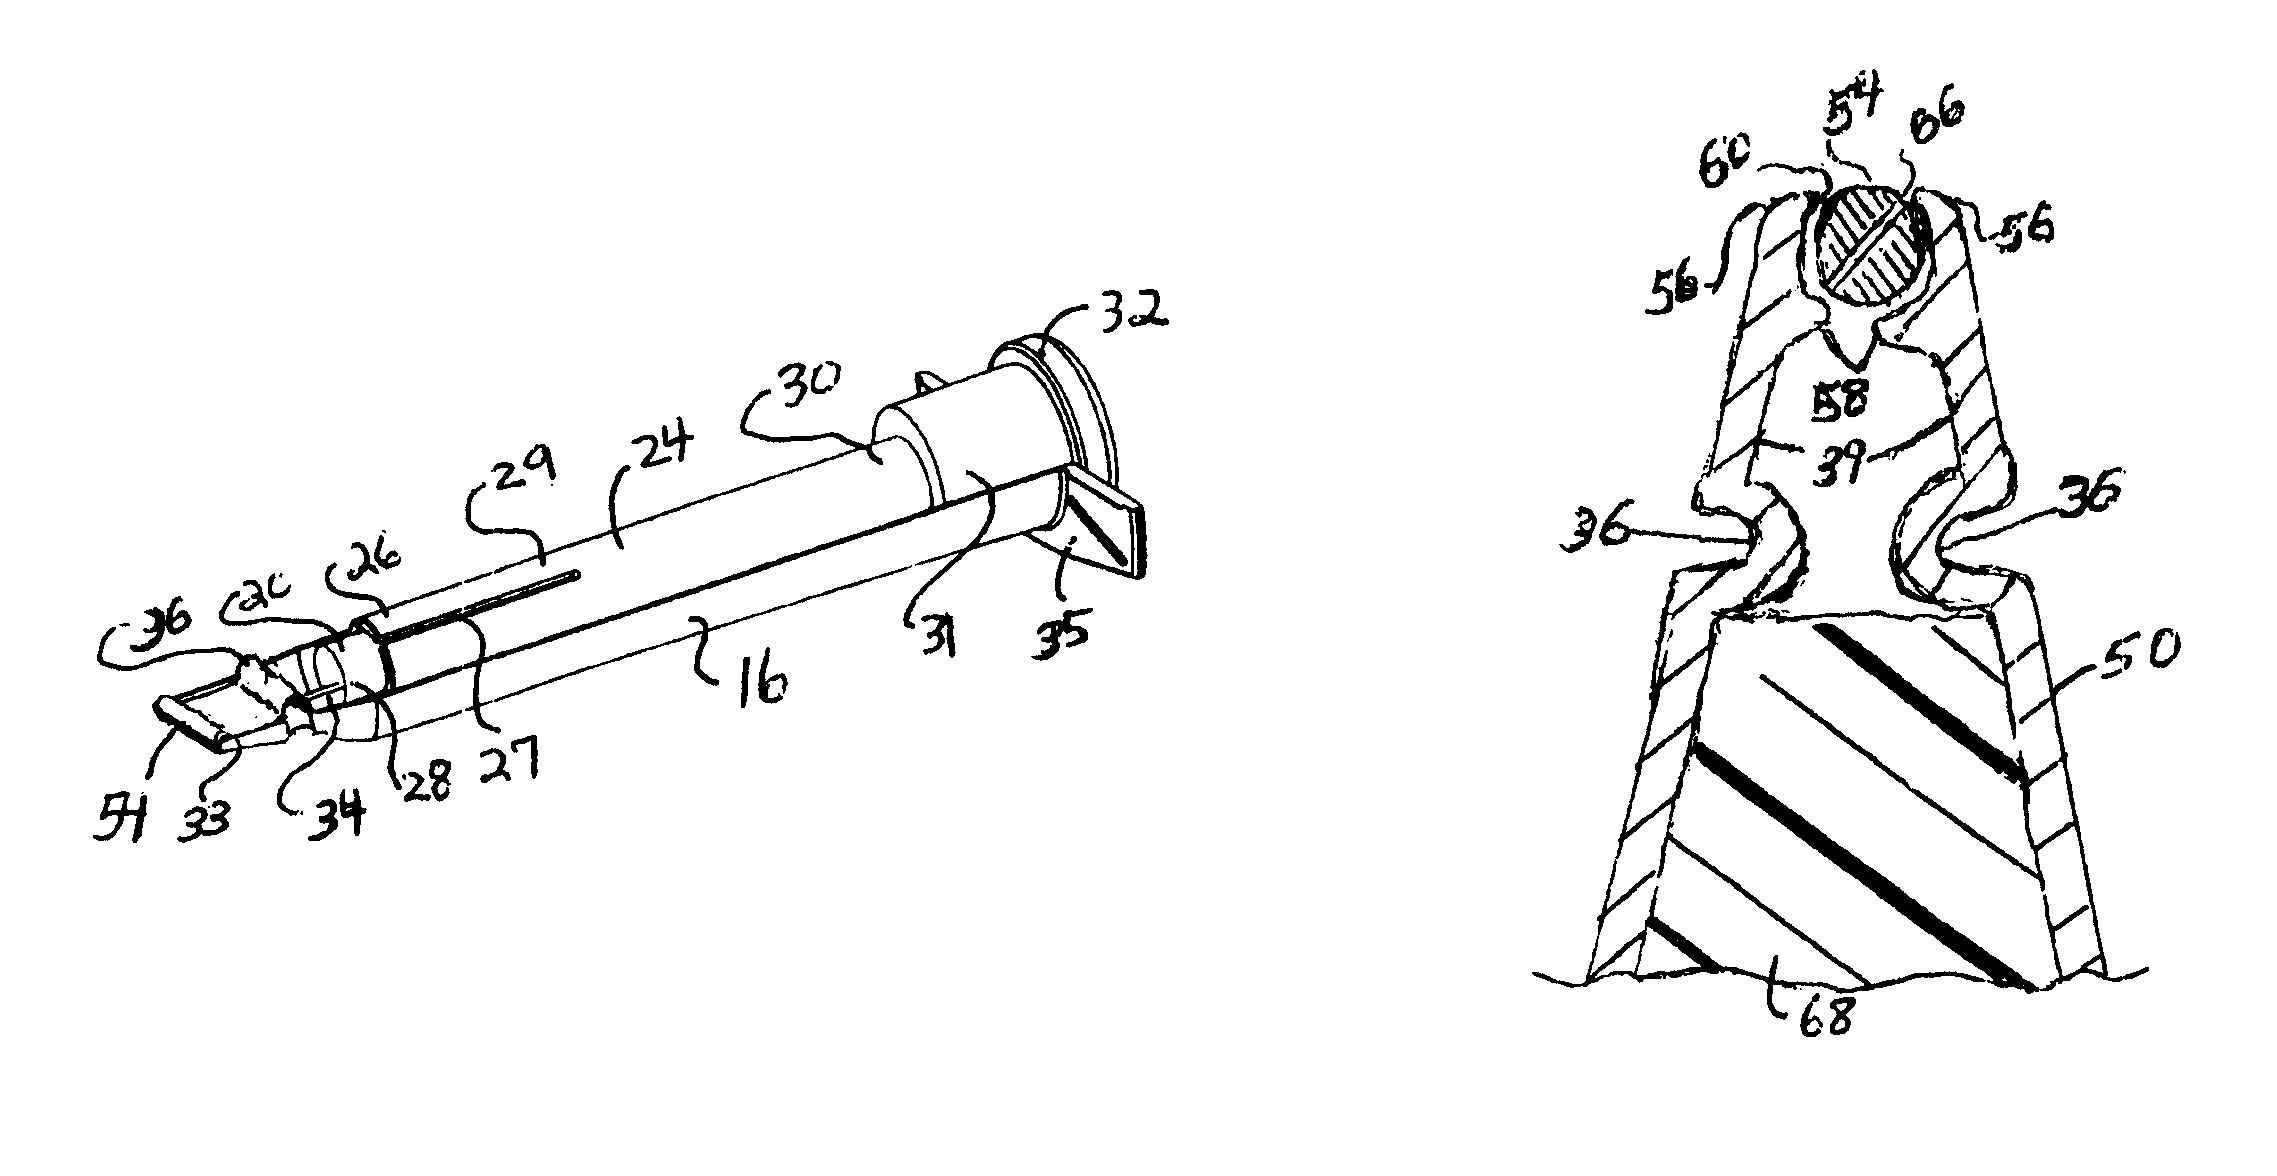 Applicator with flexible dispensing end